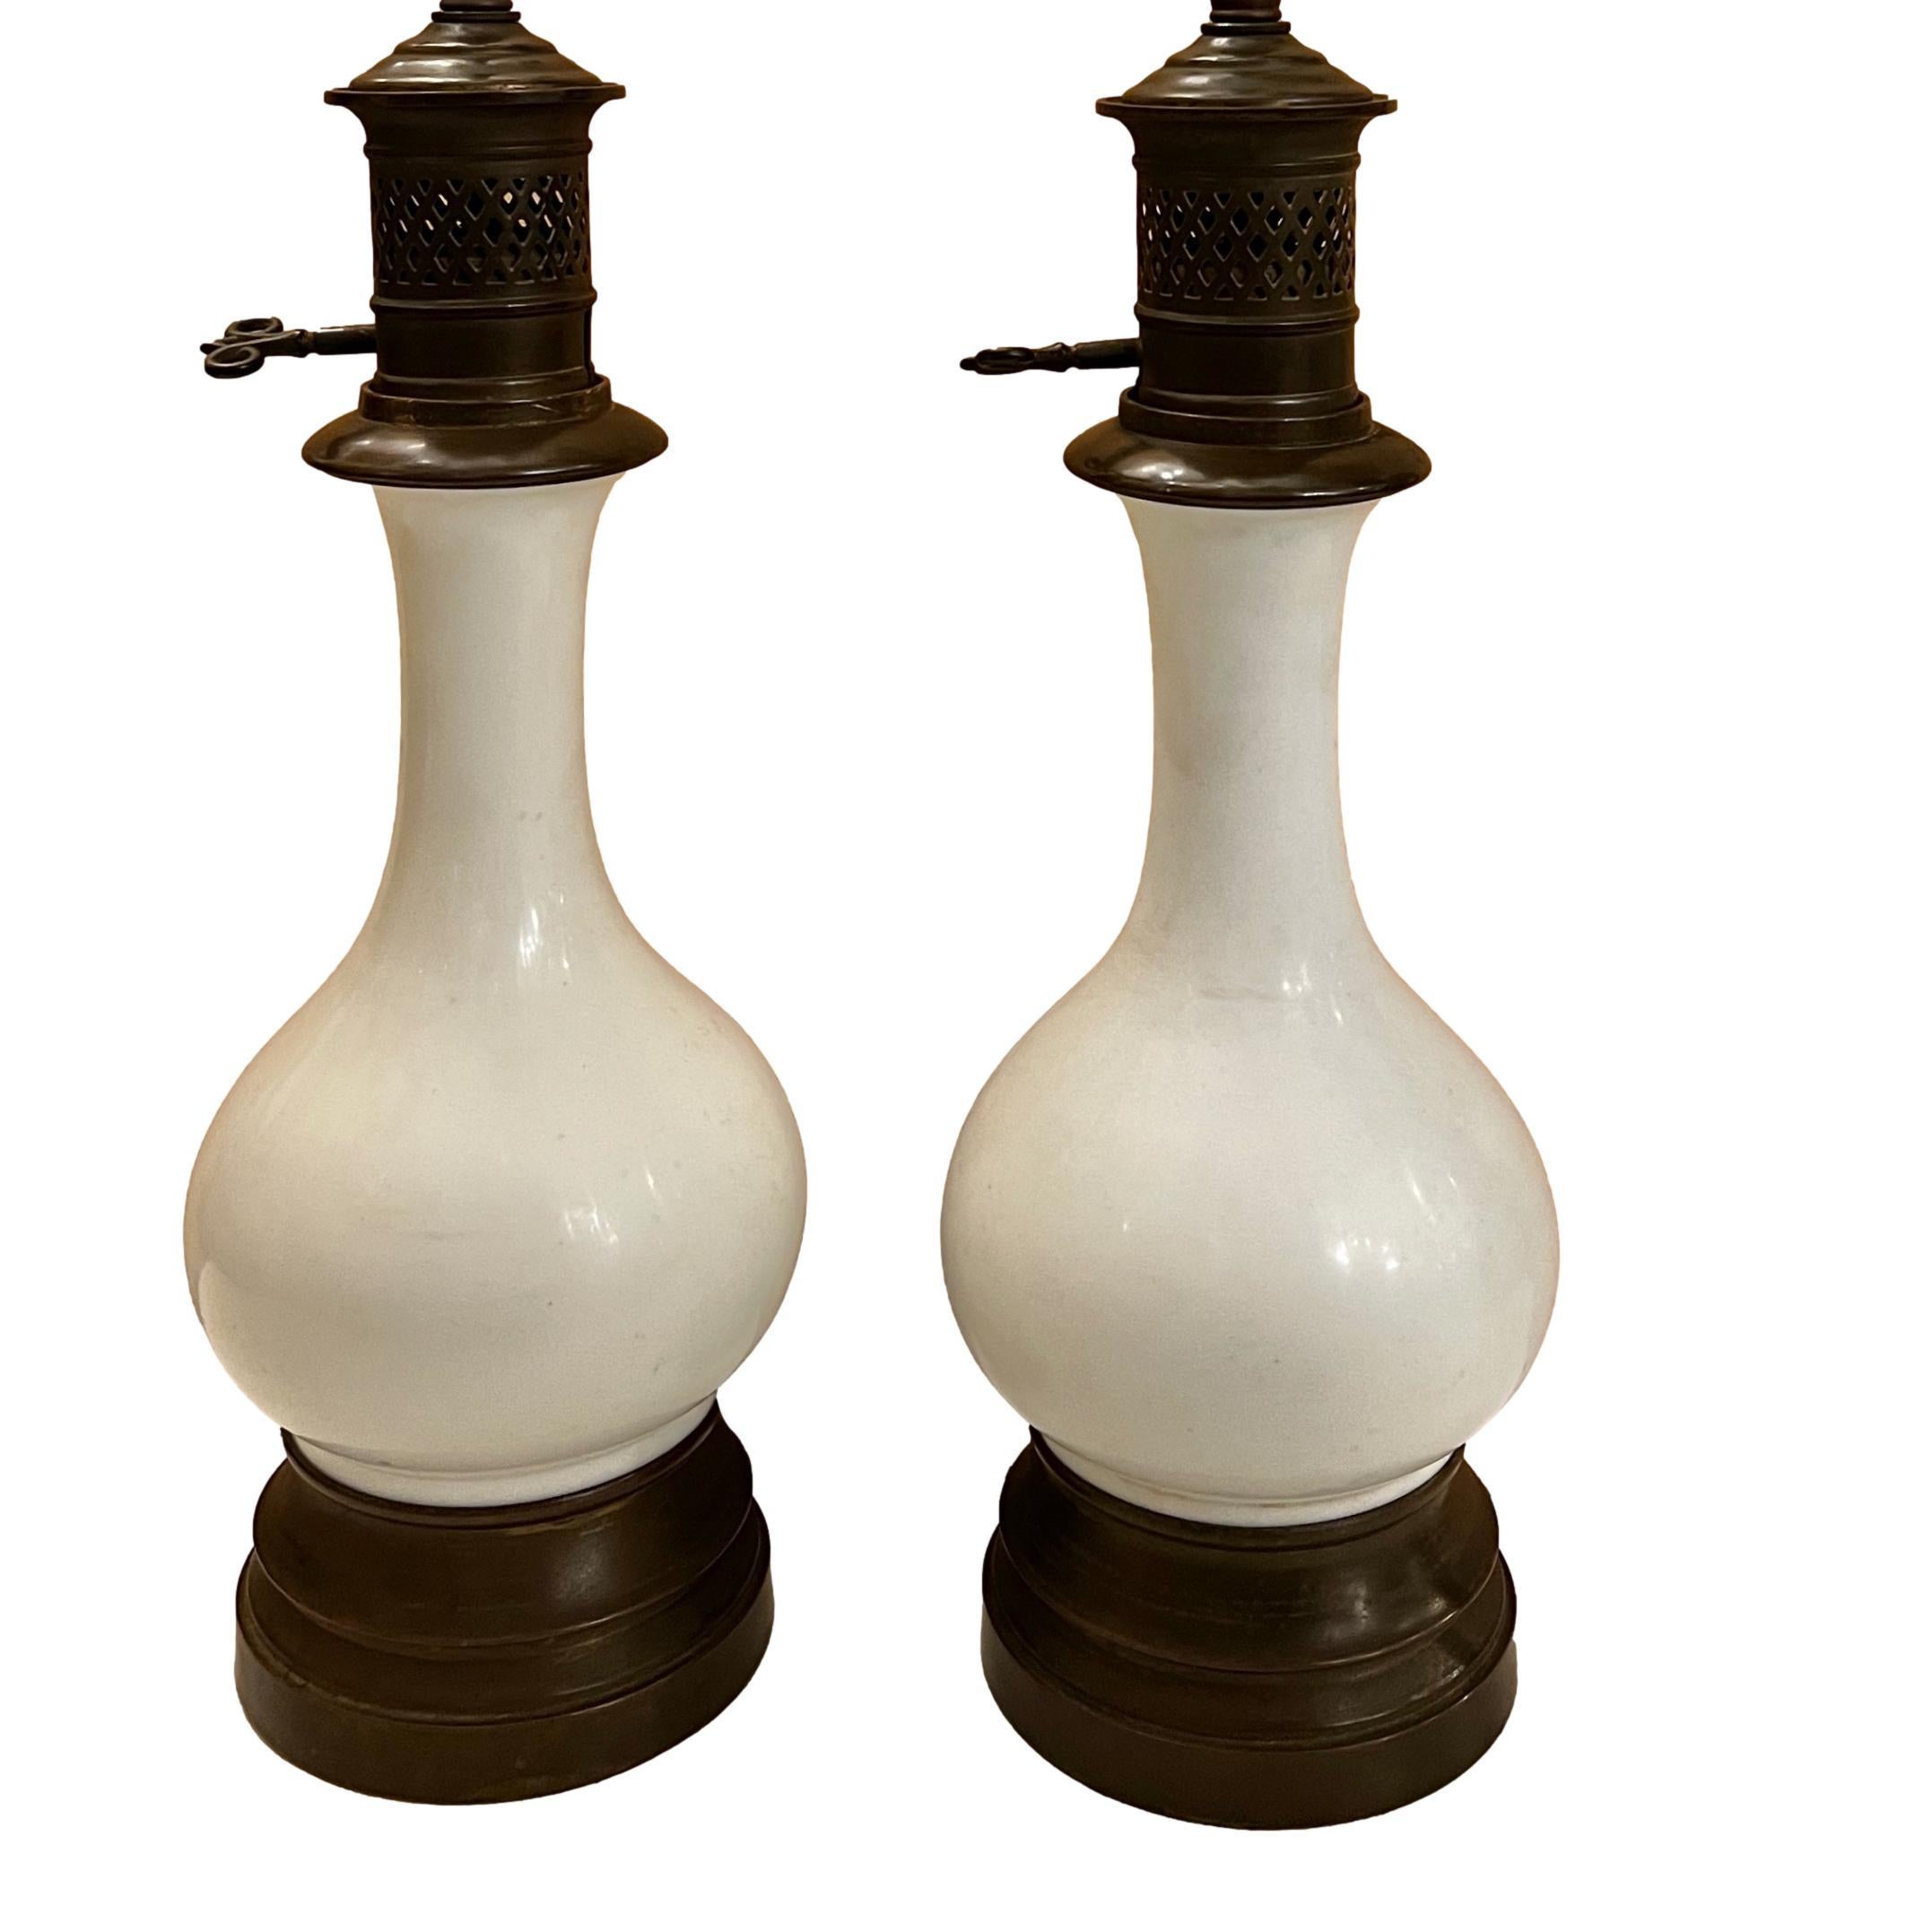 A pair of circa 1920’s French white porcelain table lamps with original patina.

Measurements:
Height of body: 15?
Height to shade rest: 24?
Diameter at widest: 5.5?.